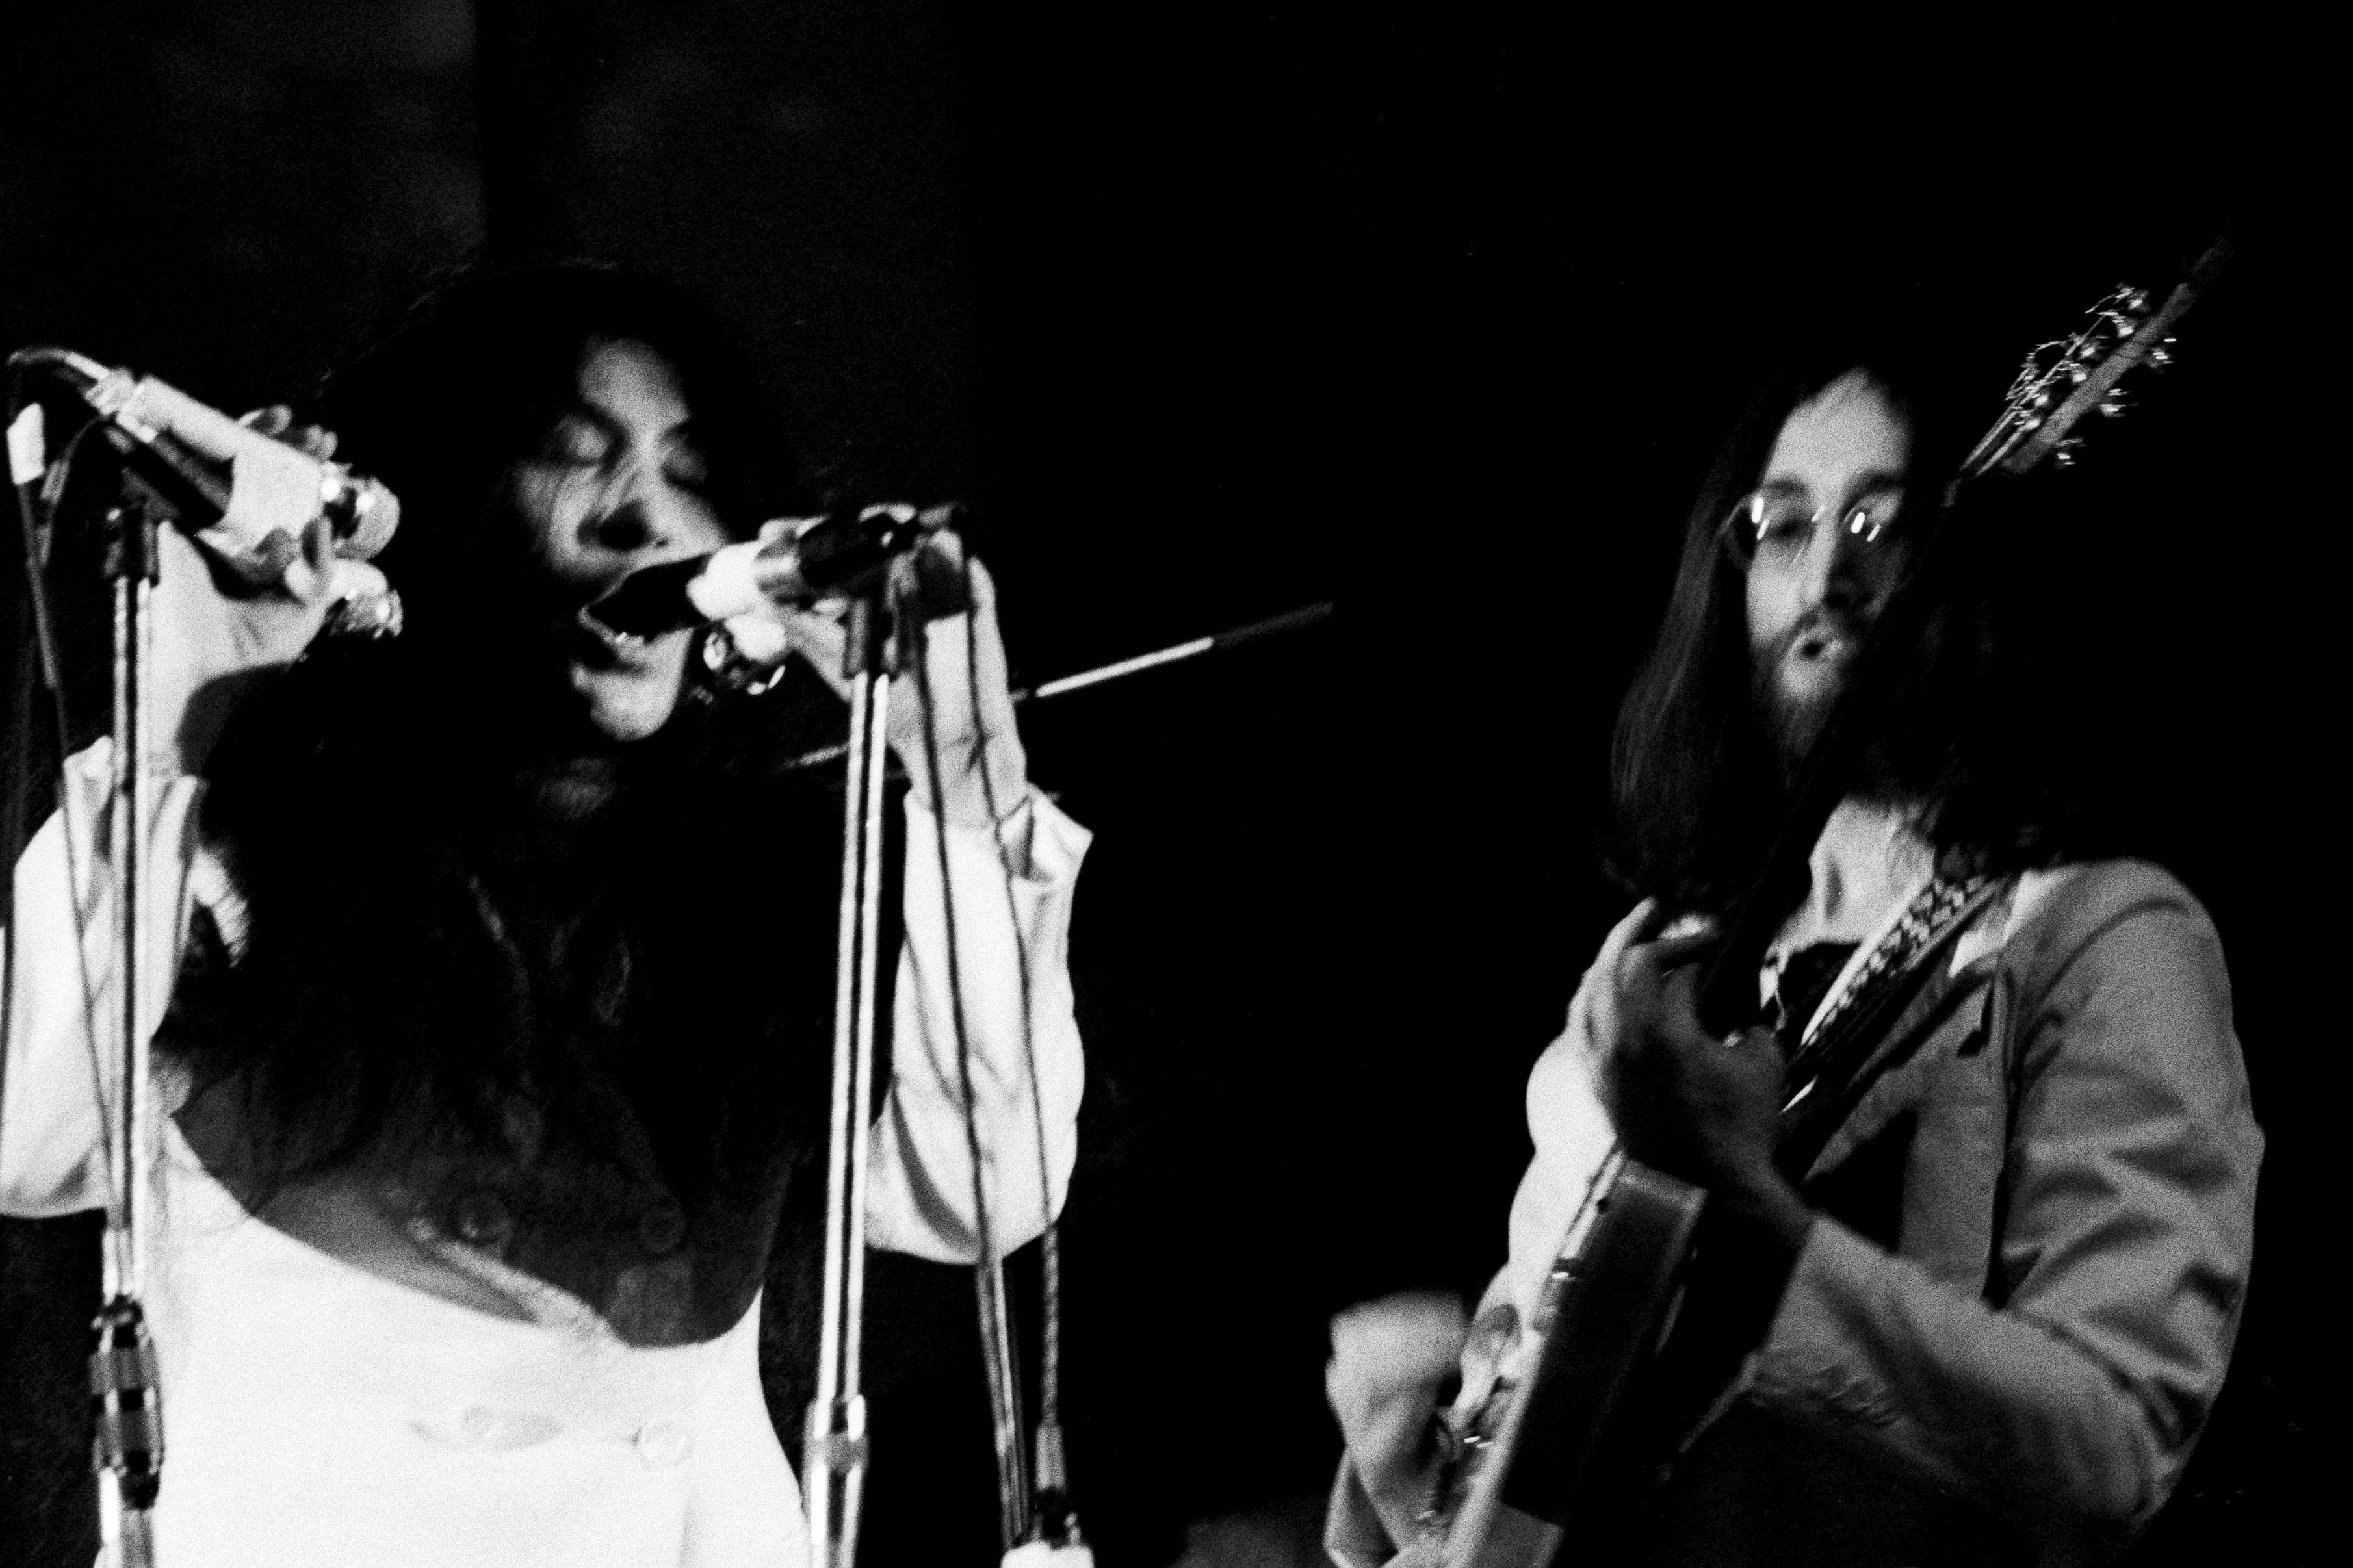 Yoko Ono and John Lennon performing on stage with the Plastic Ono Band at UN Childrens Fund concert